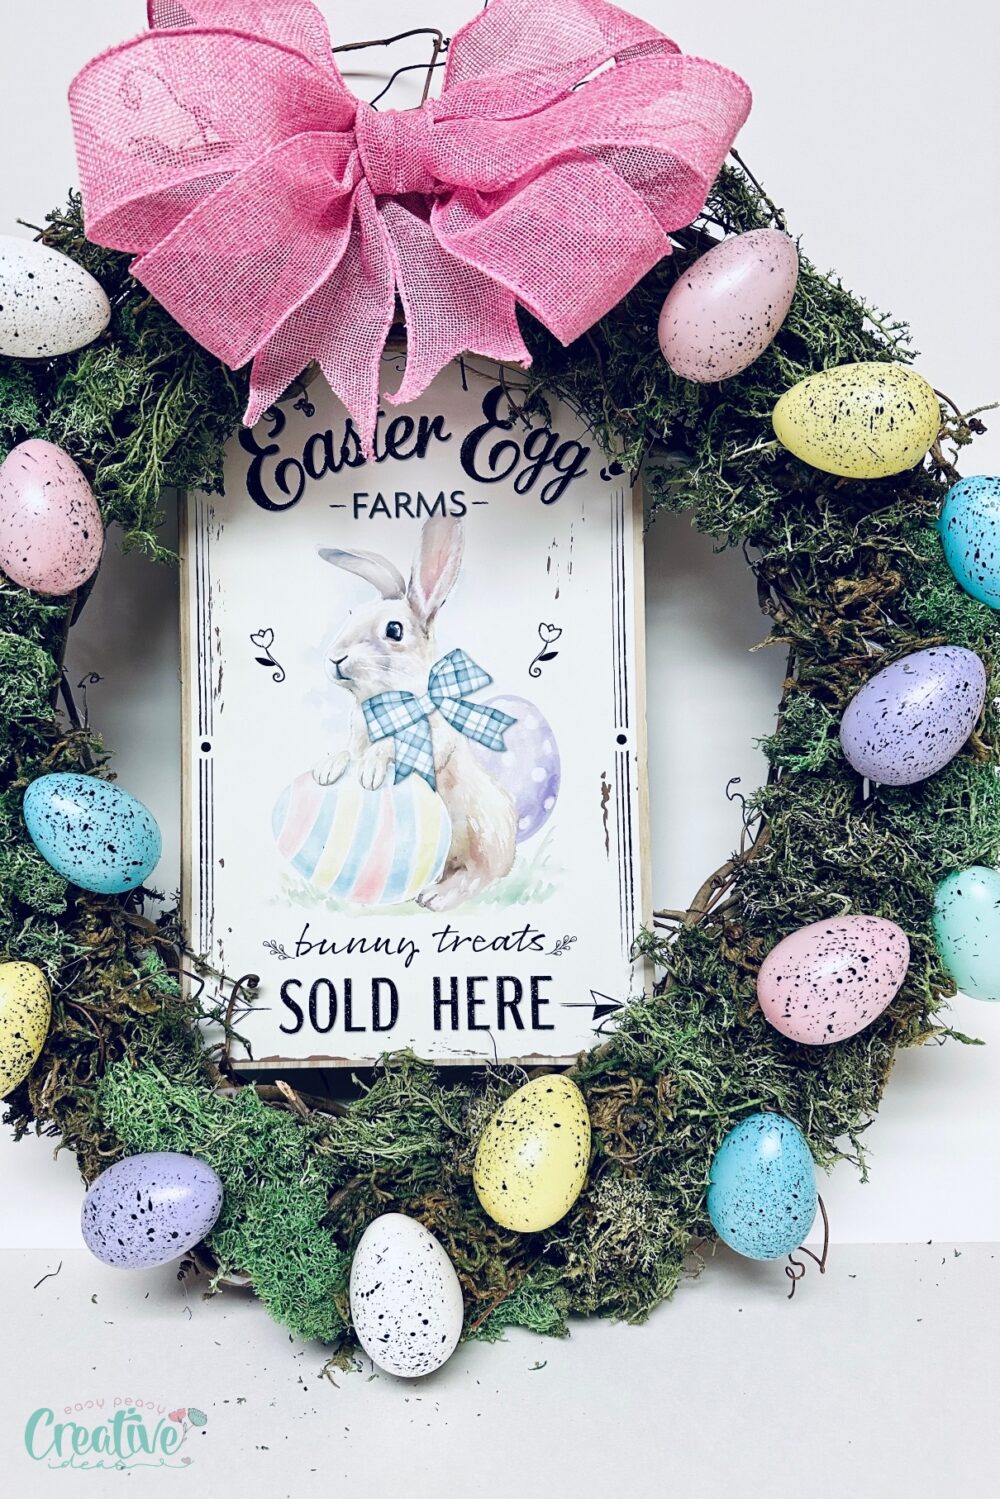 Colorful Easter wreath DIY with eggs and a sign, perfect for spring décor.